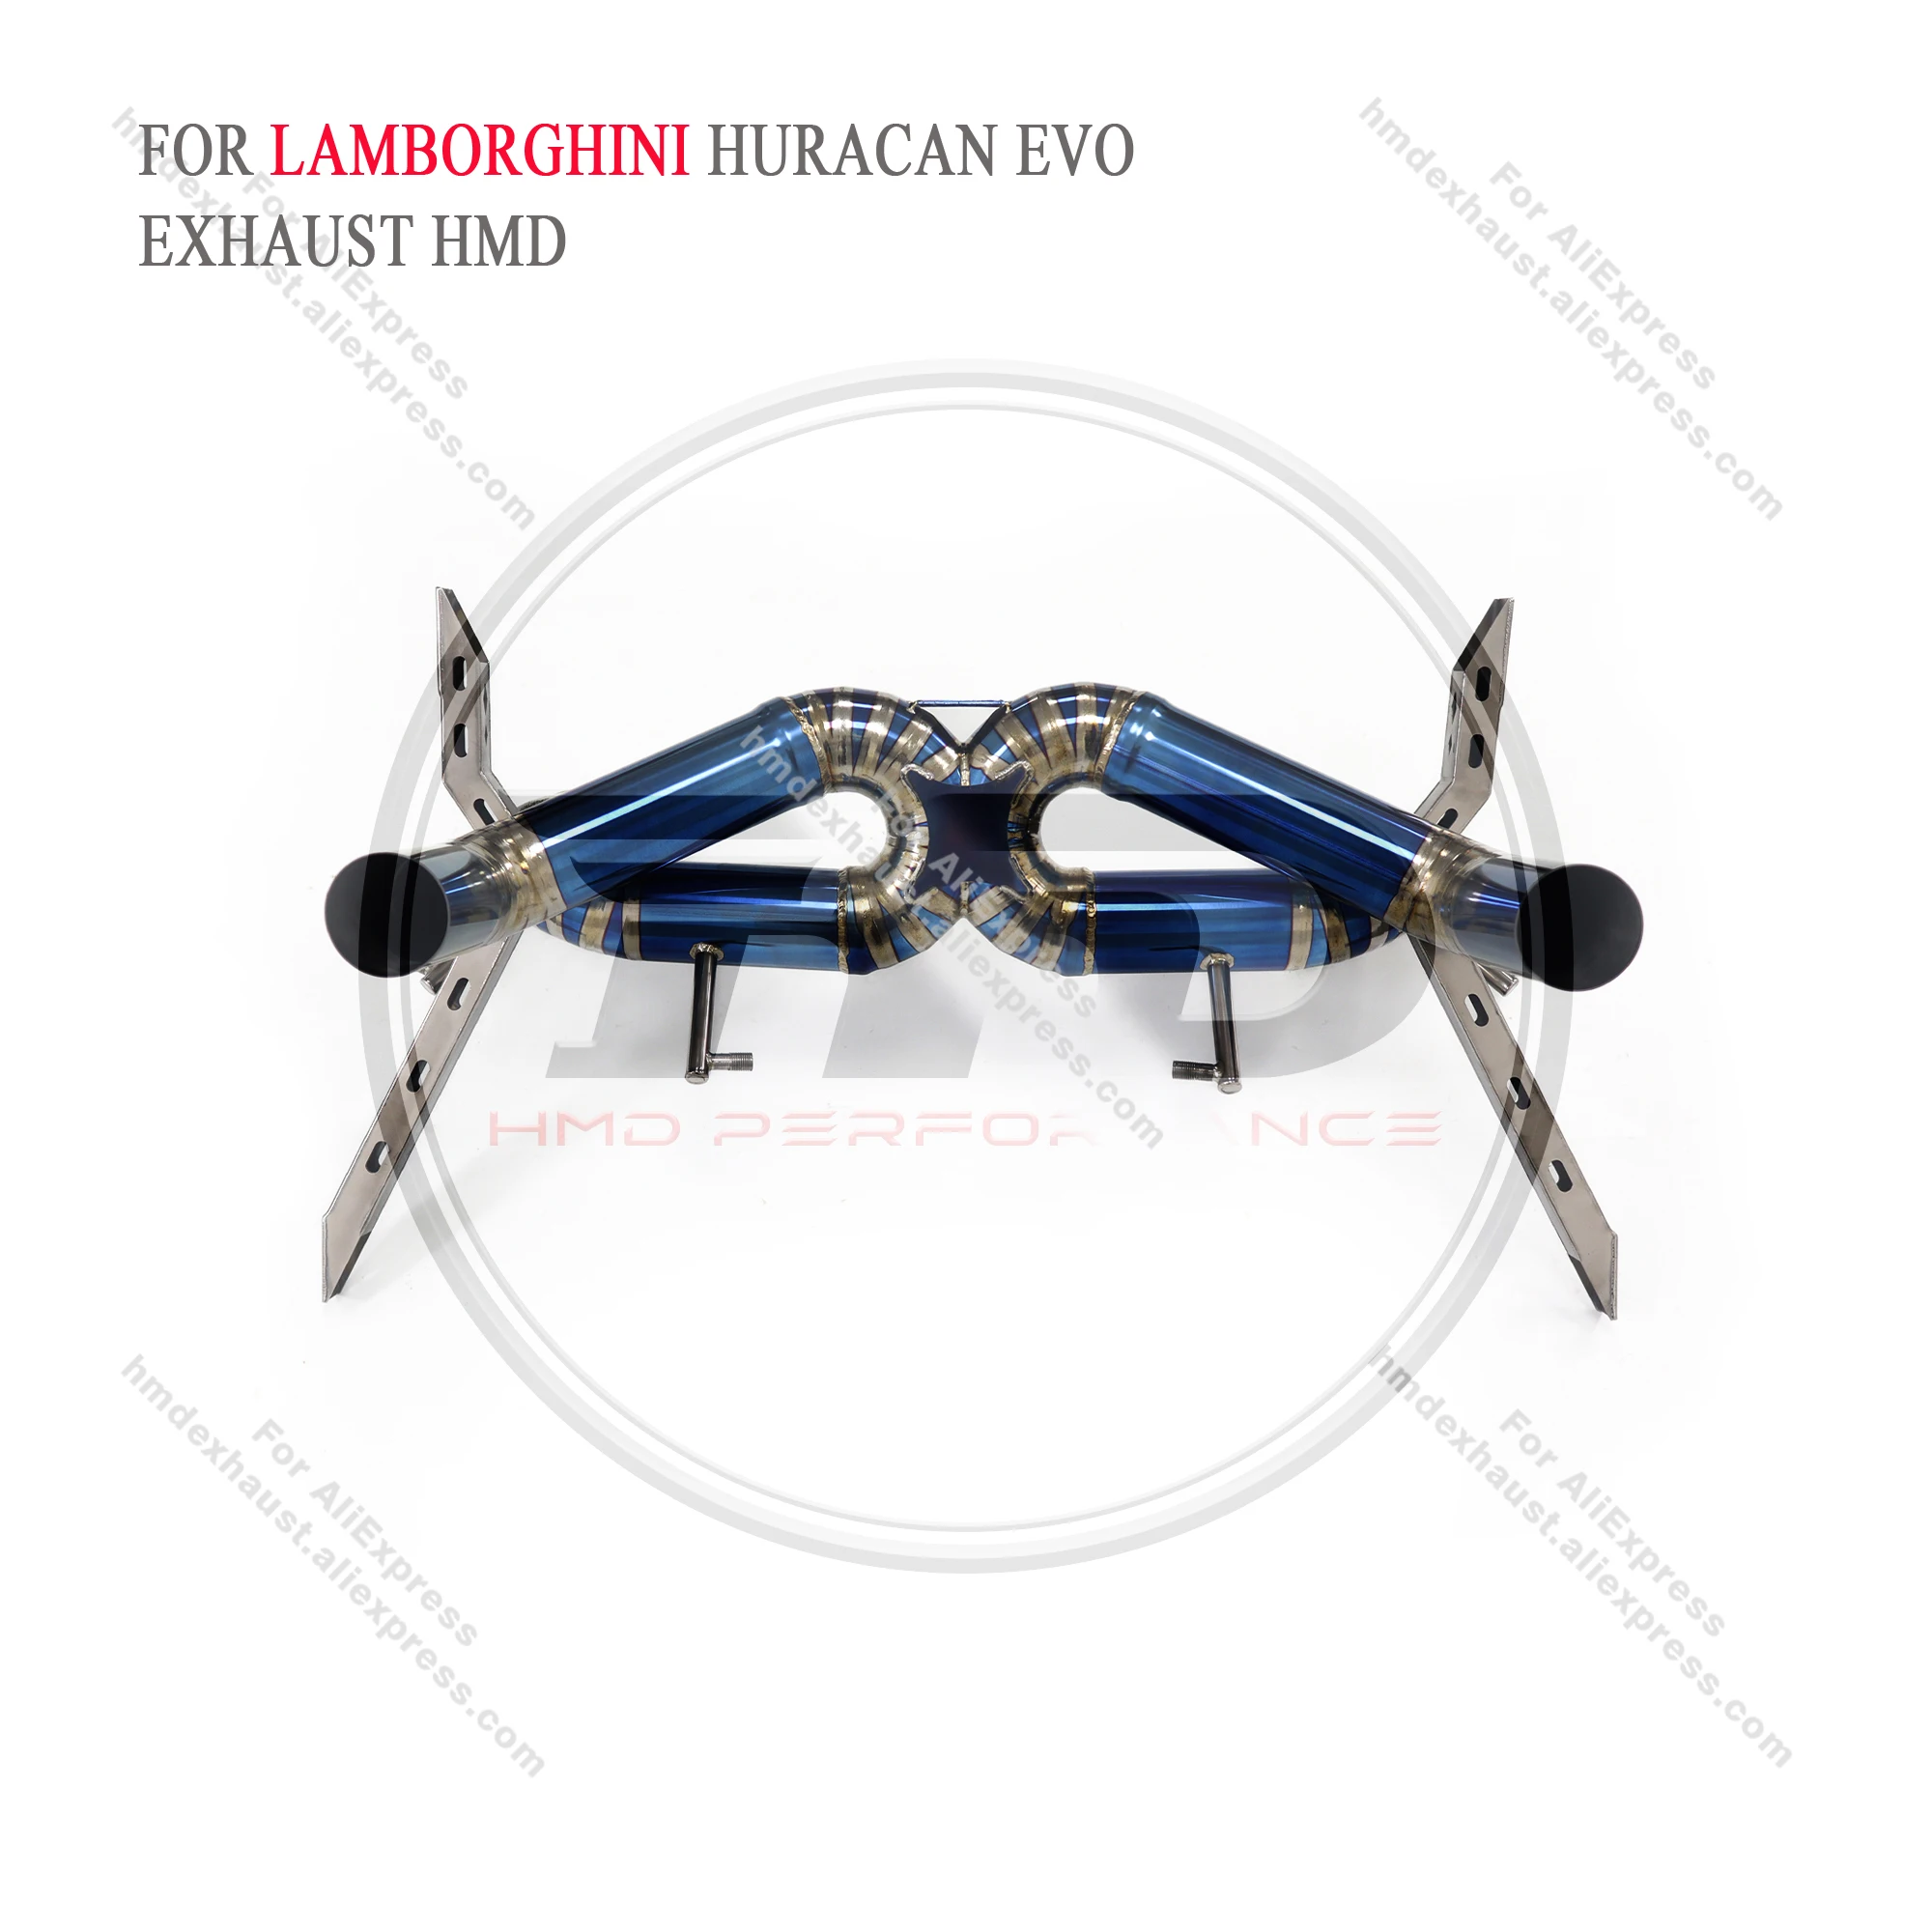 

HMD Titanium Alloy Exhaust System Performance Catback For Lamborghini Huracan EVO 2019+ Without Valve with OPF